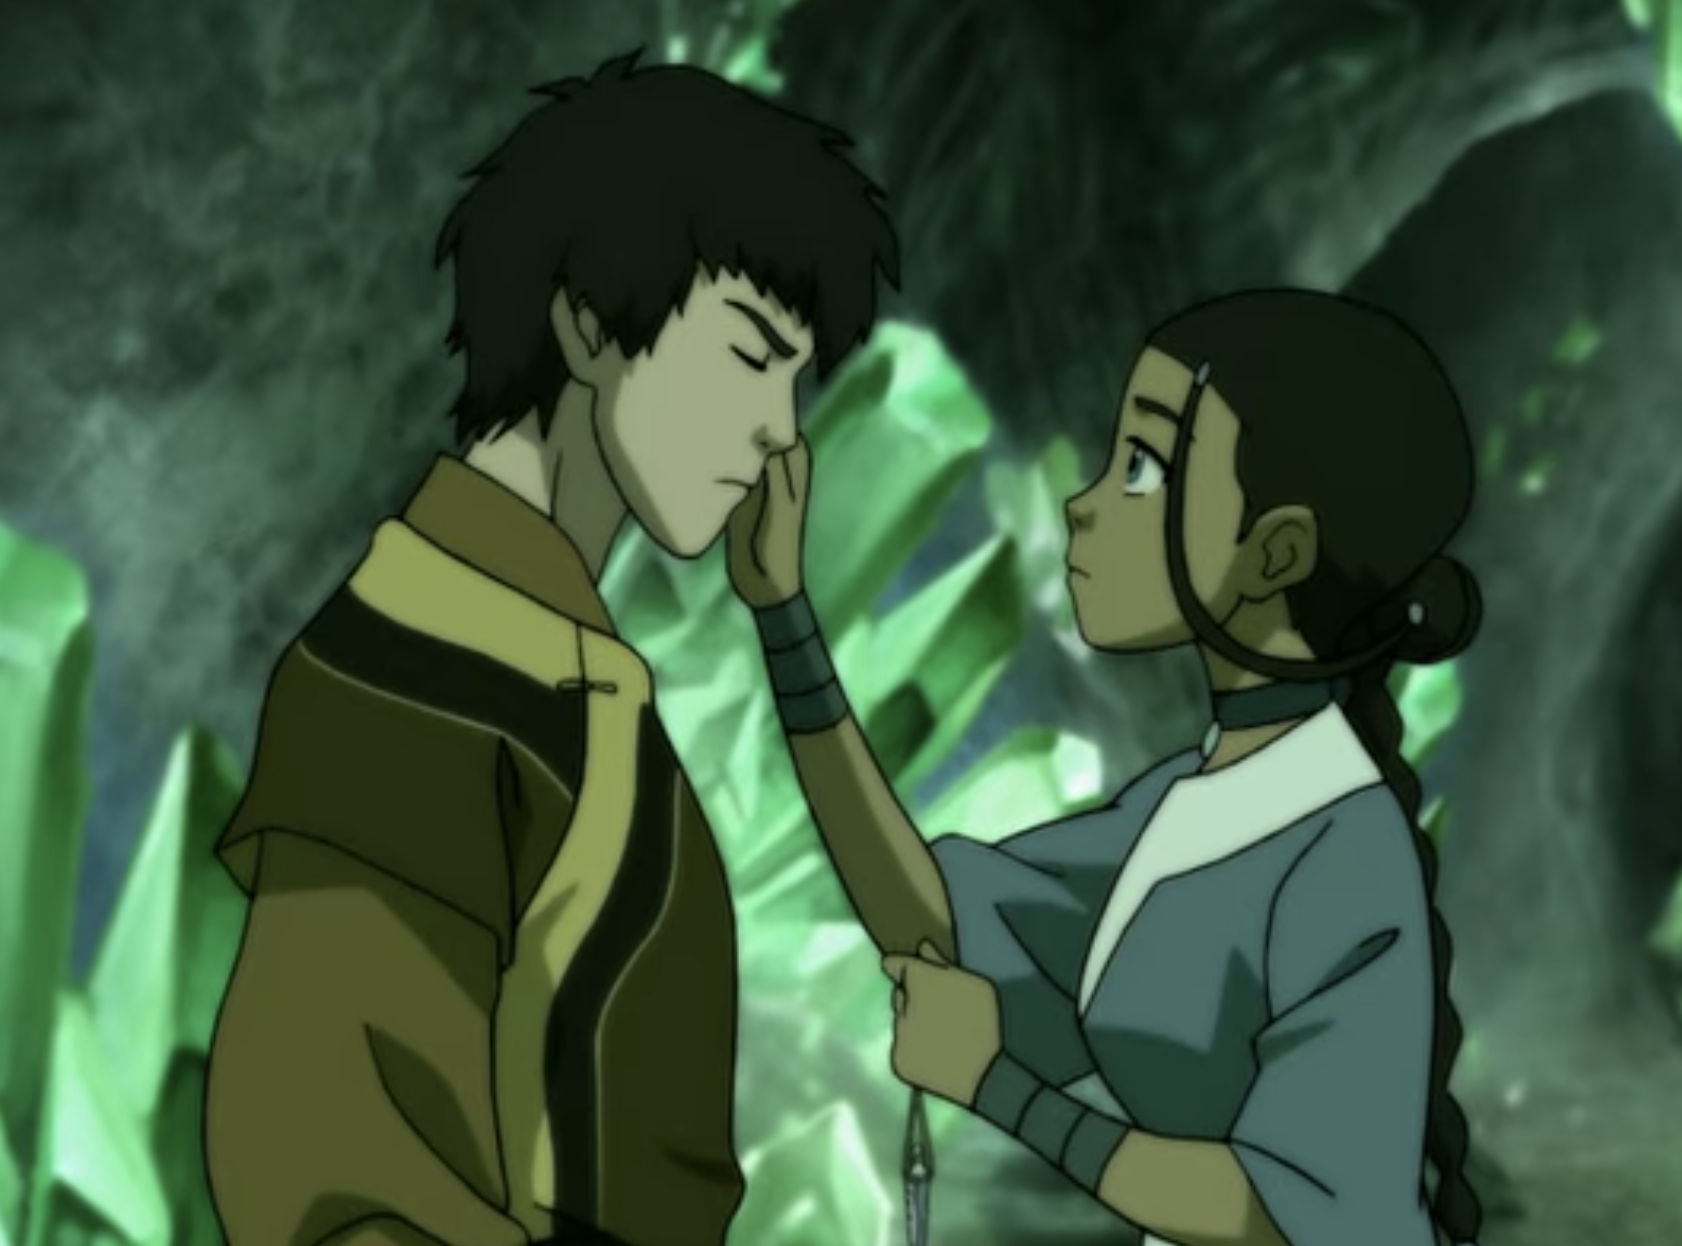 No Avatar The Last Airbender is NOT an Anime Heres Why